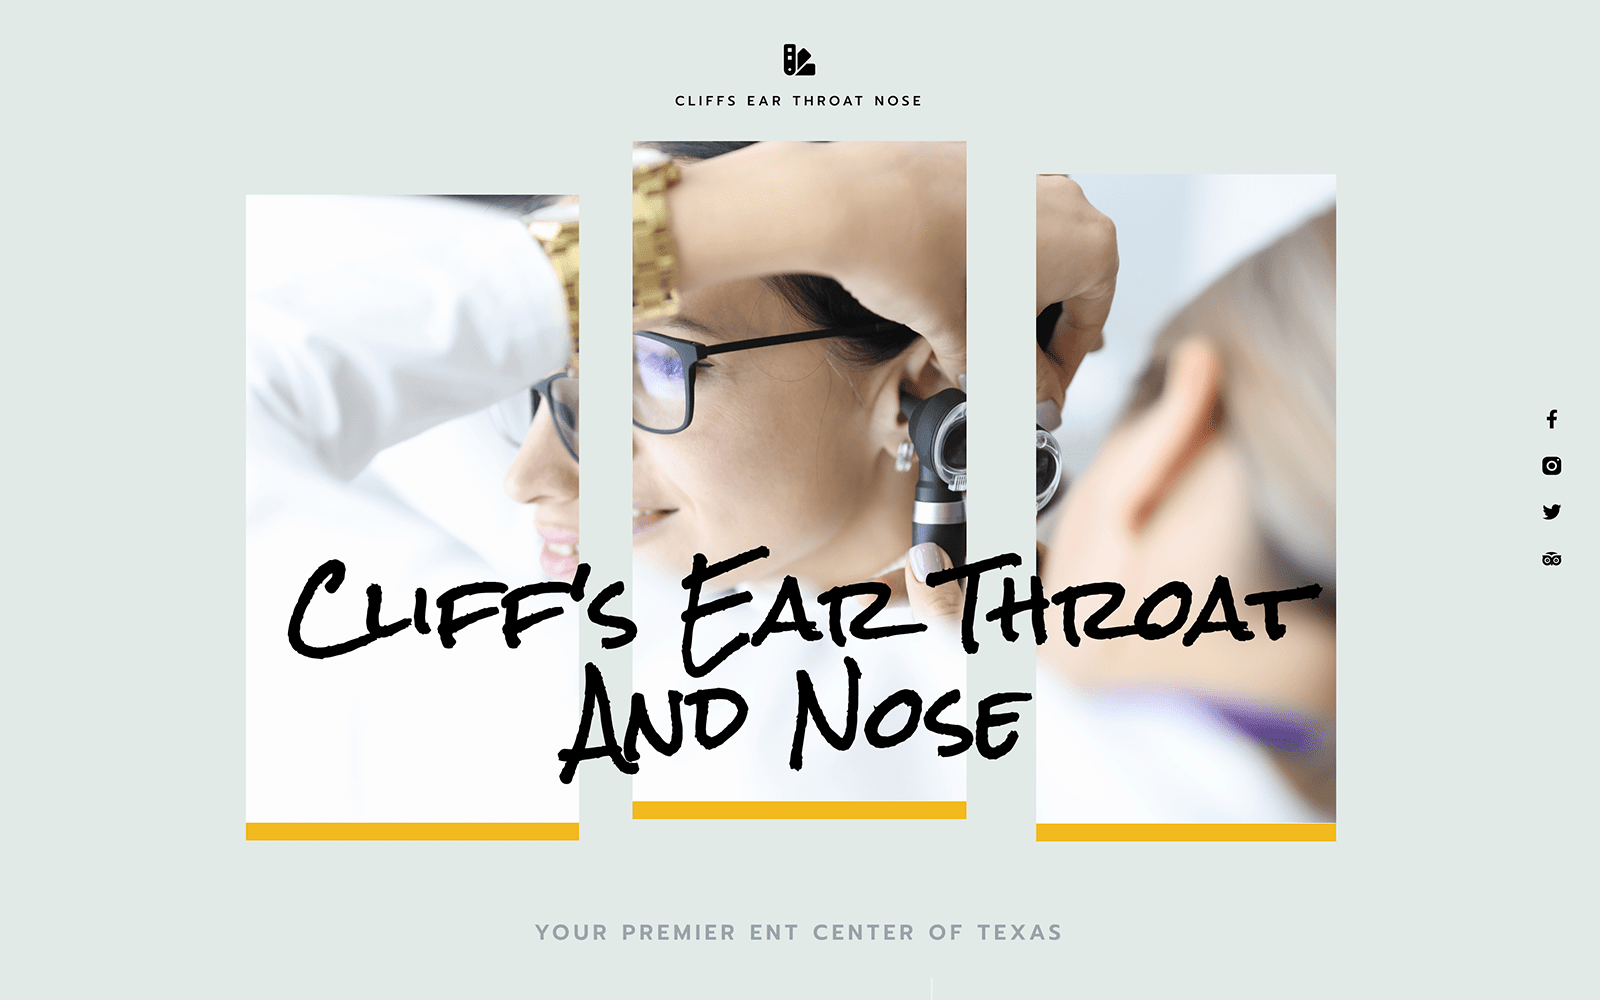 Cliff's Ear Throat and Nose Website